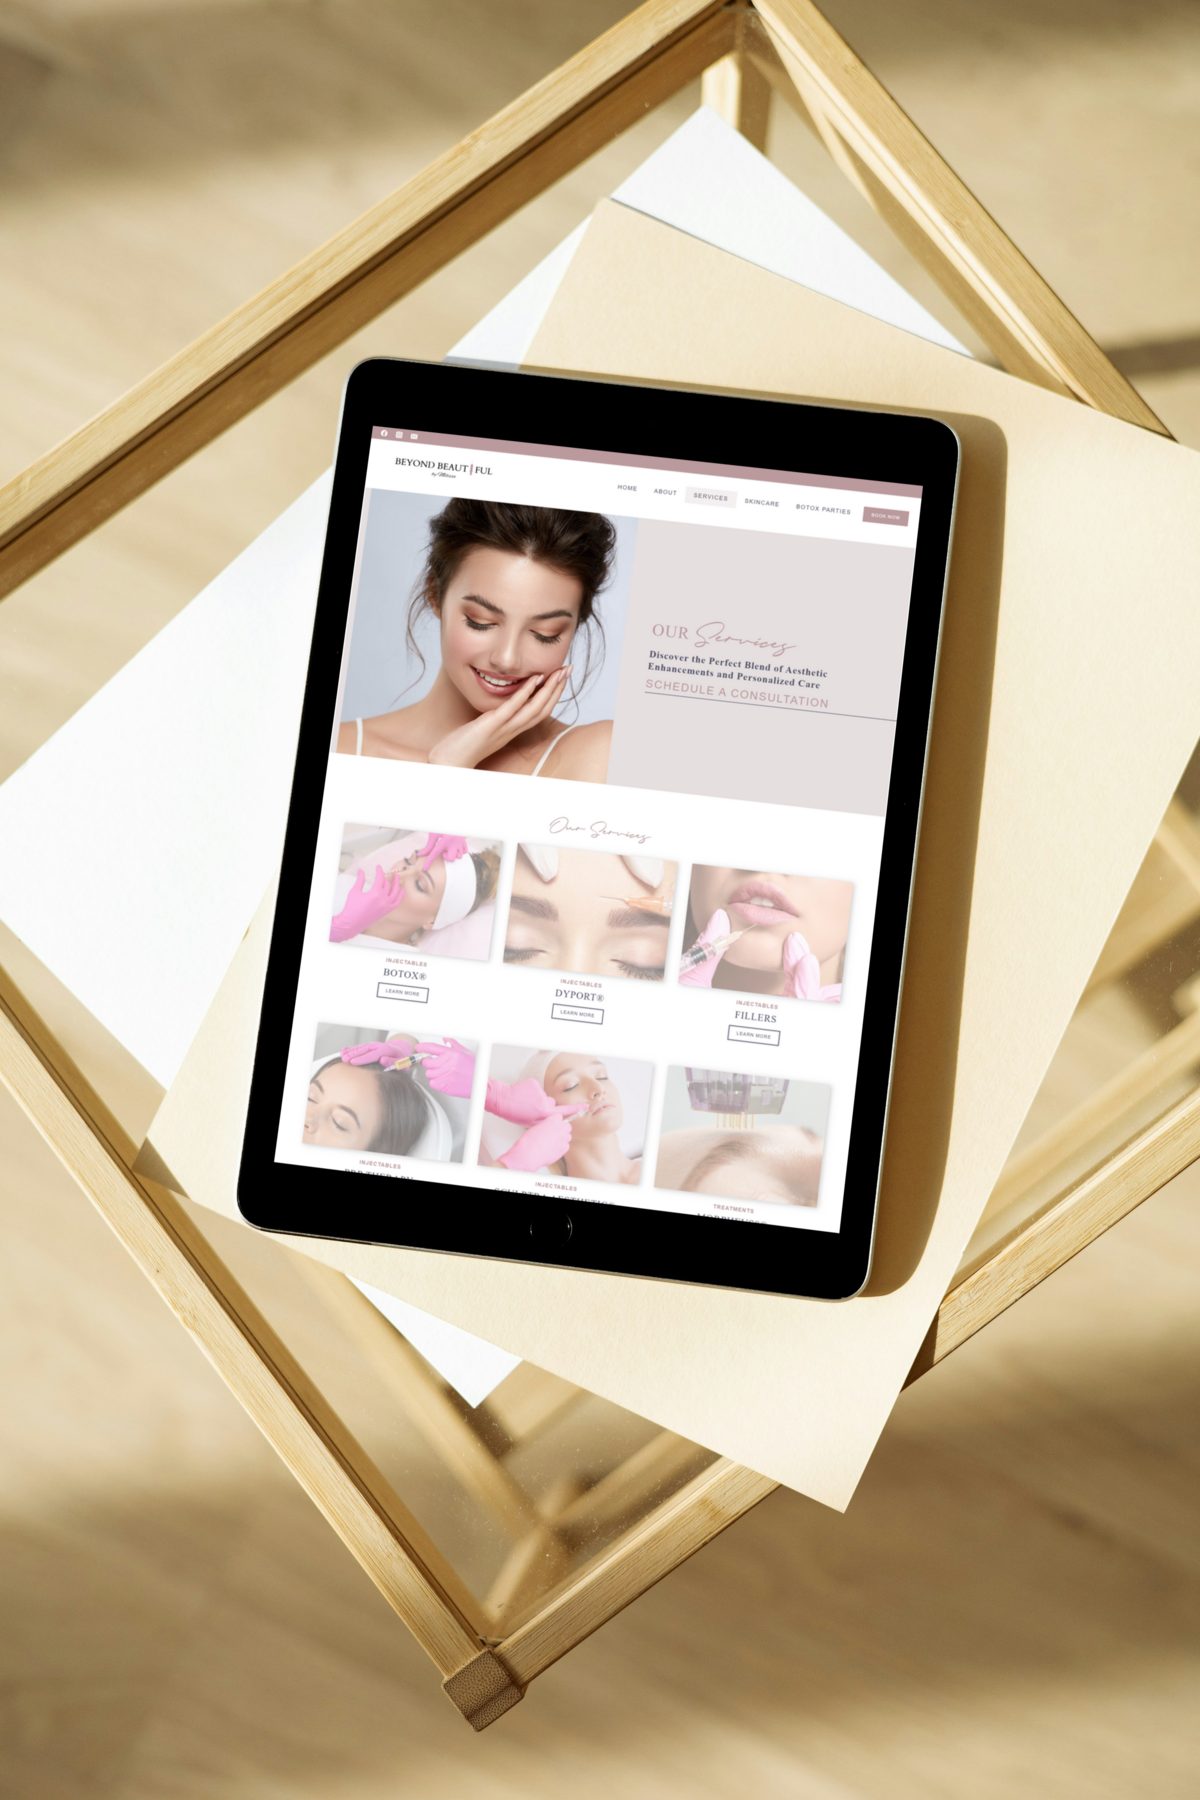 Discover how transformative web design by The Agency can turn a med spa's website into a compelling digital destination for prospective clients.